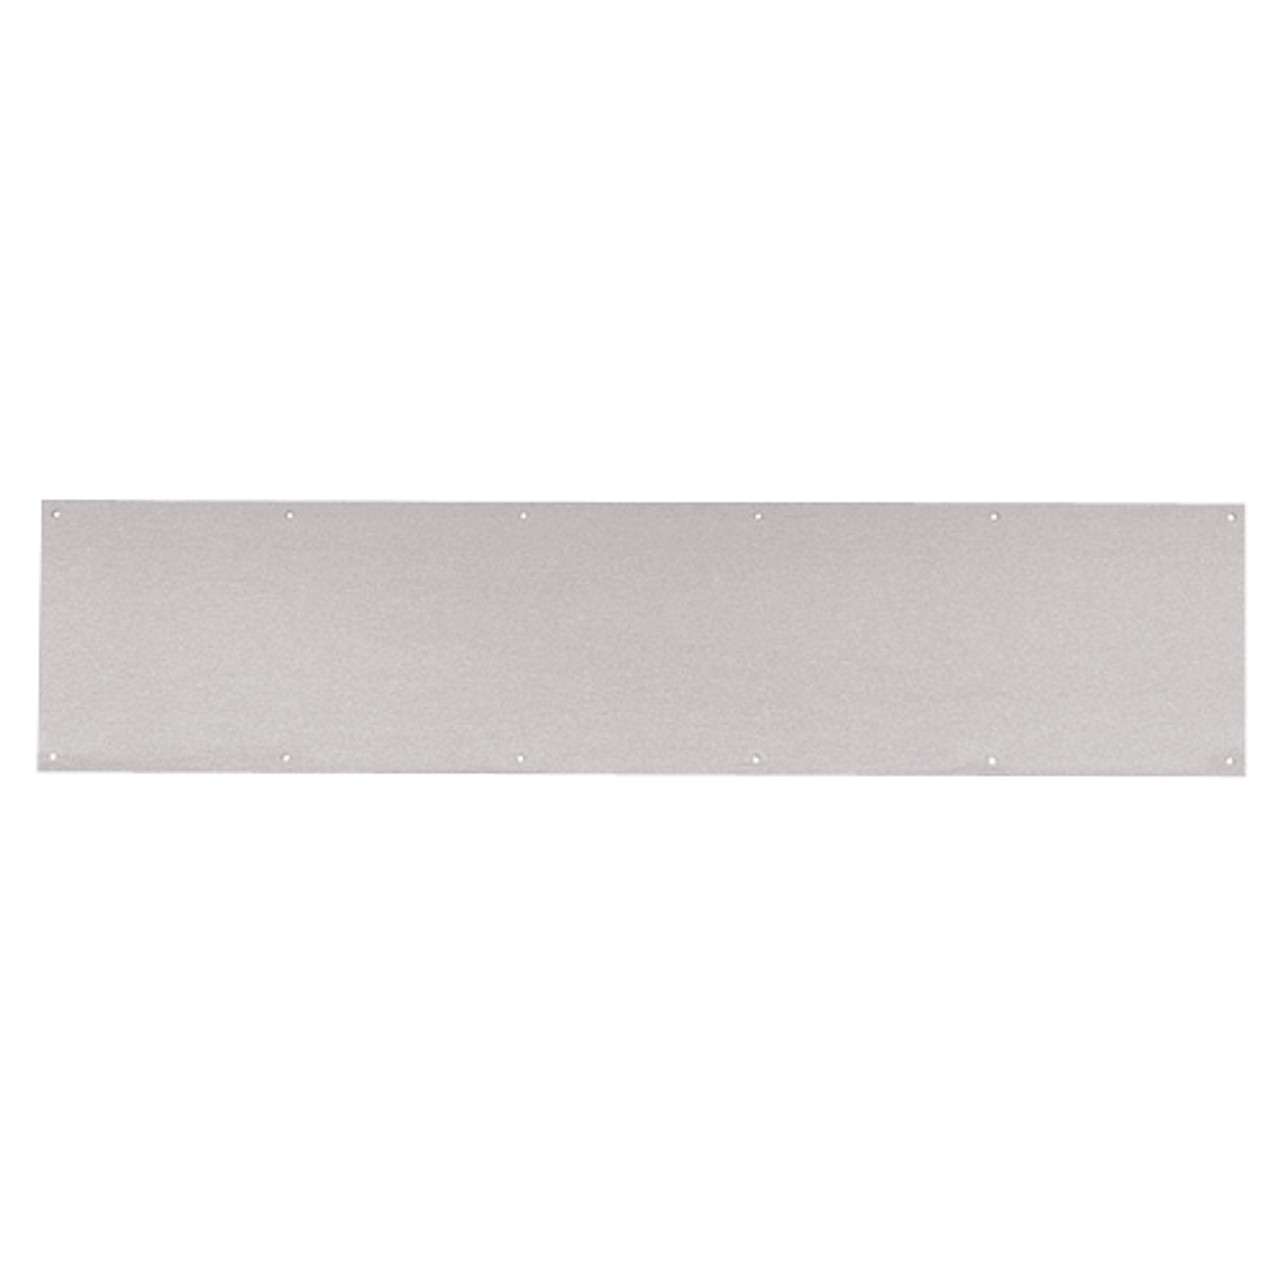 8400-US32D-25x41.5-B-CS Ives 8400 Series Protection Plate in Satin Stainless Steel